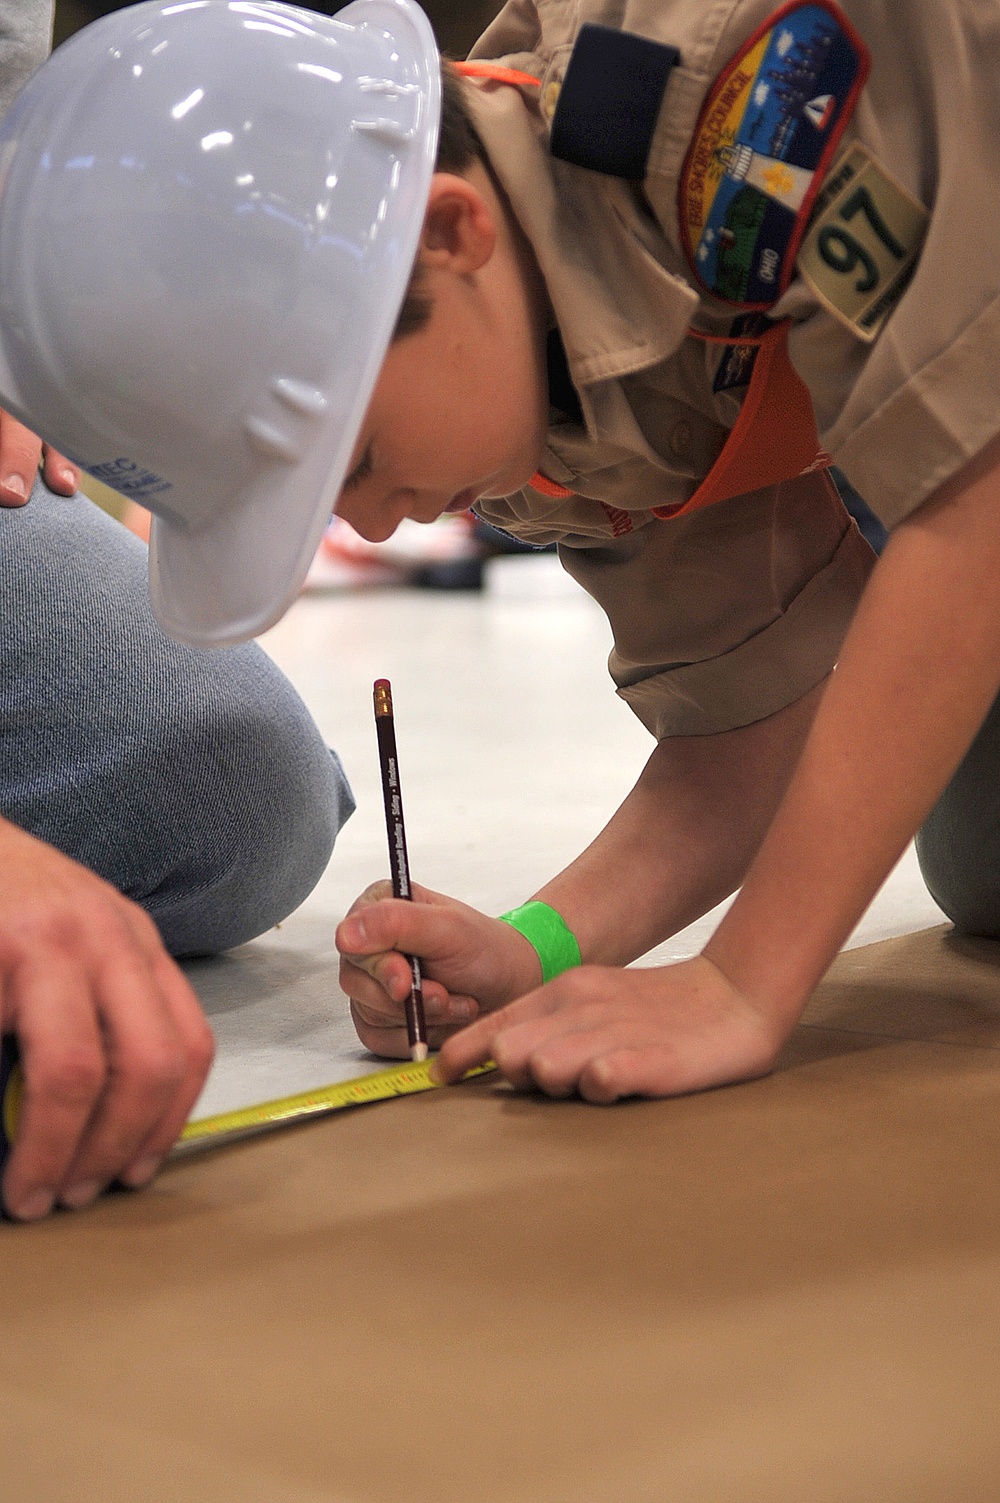 180th Fighter Wing partners with Boy Scouts of America to promote STEM